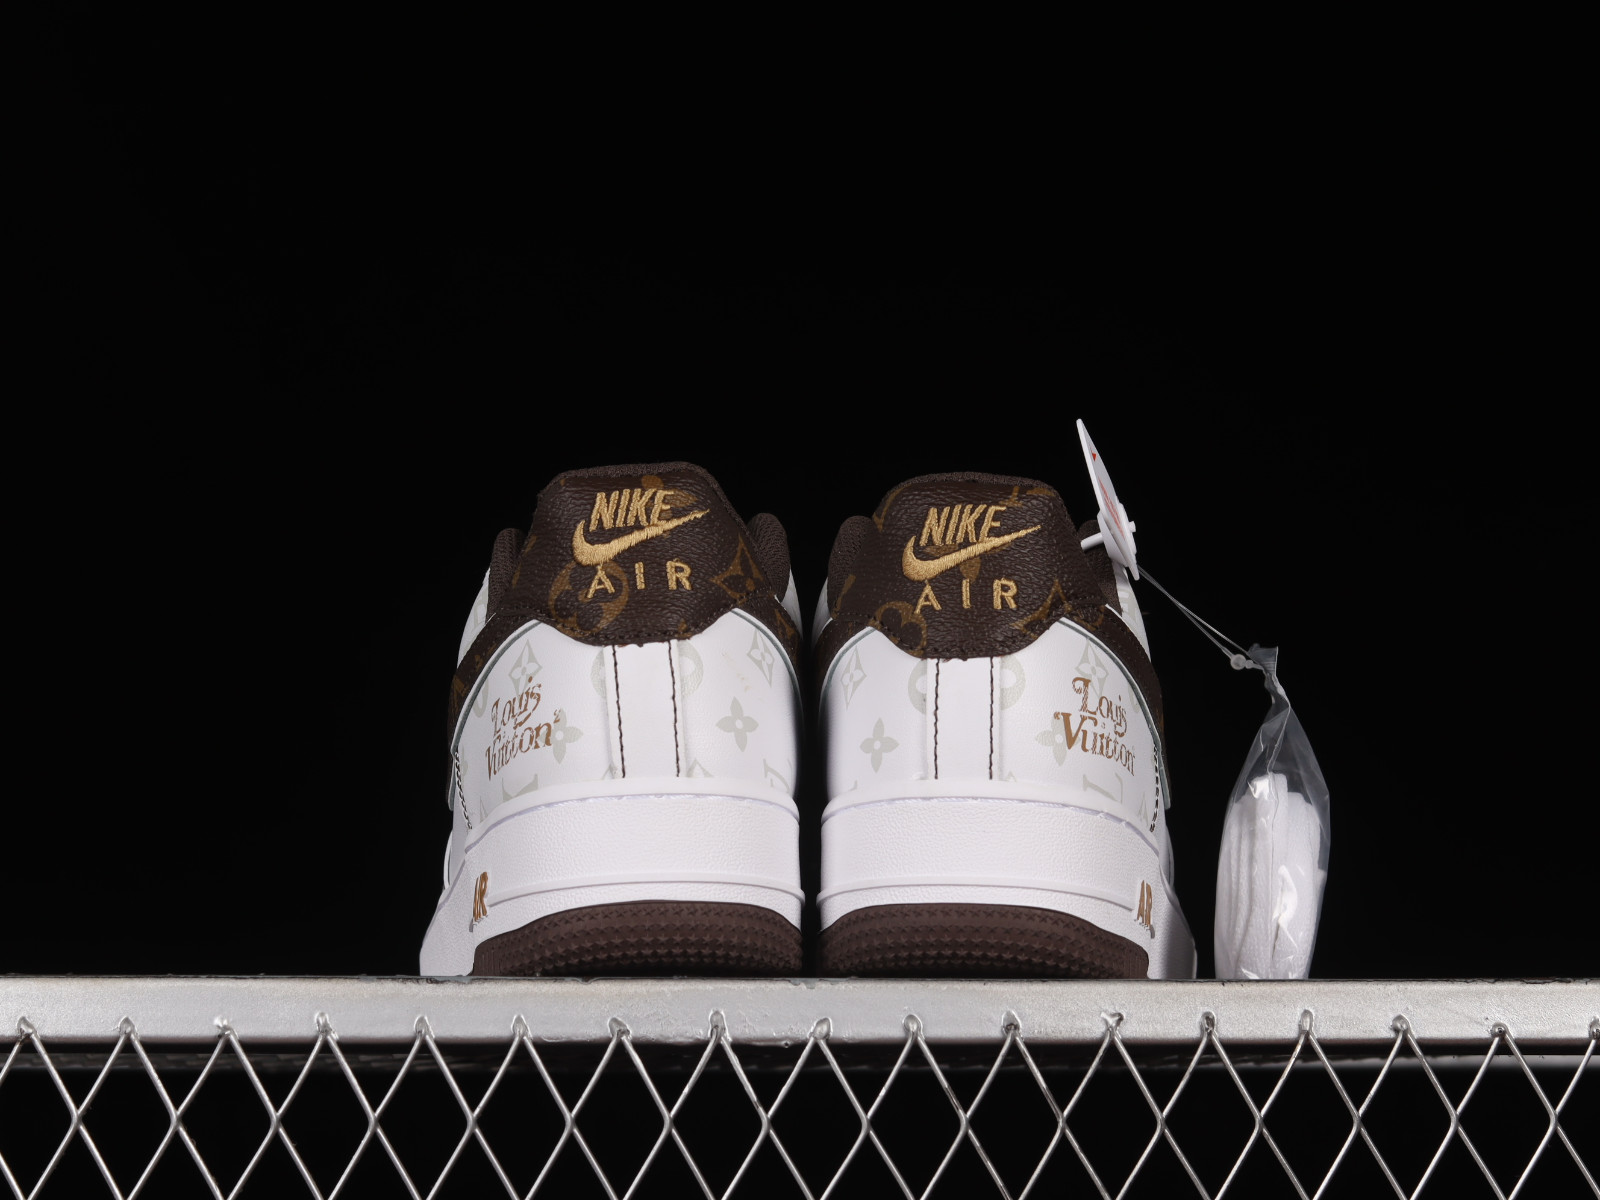 LV x Nike Air Force 1 07 Low Brown Cream White BS6055 - 301 -  MultiscaleconsultingShops - Nike SB Dunk Low Bred